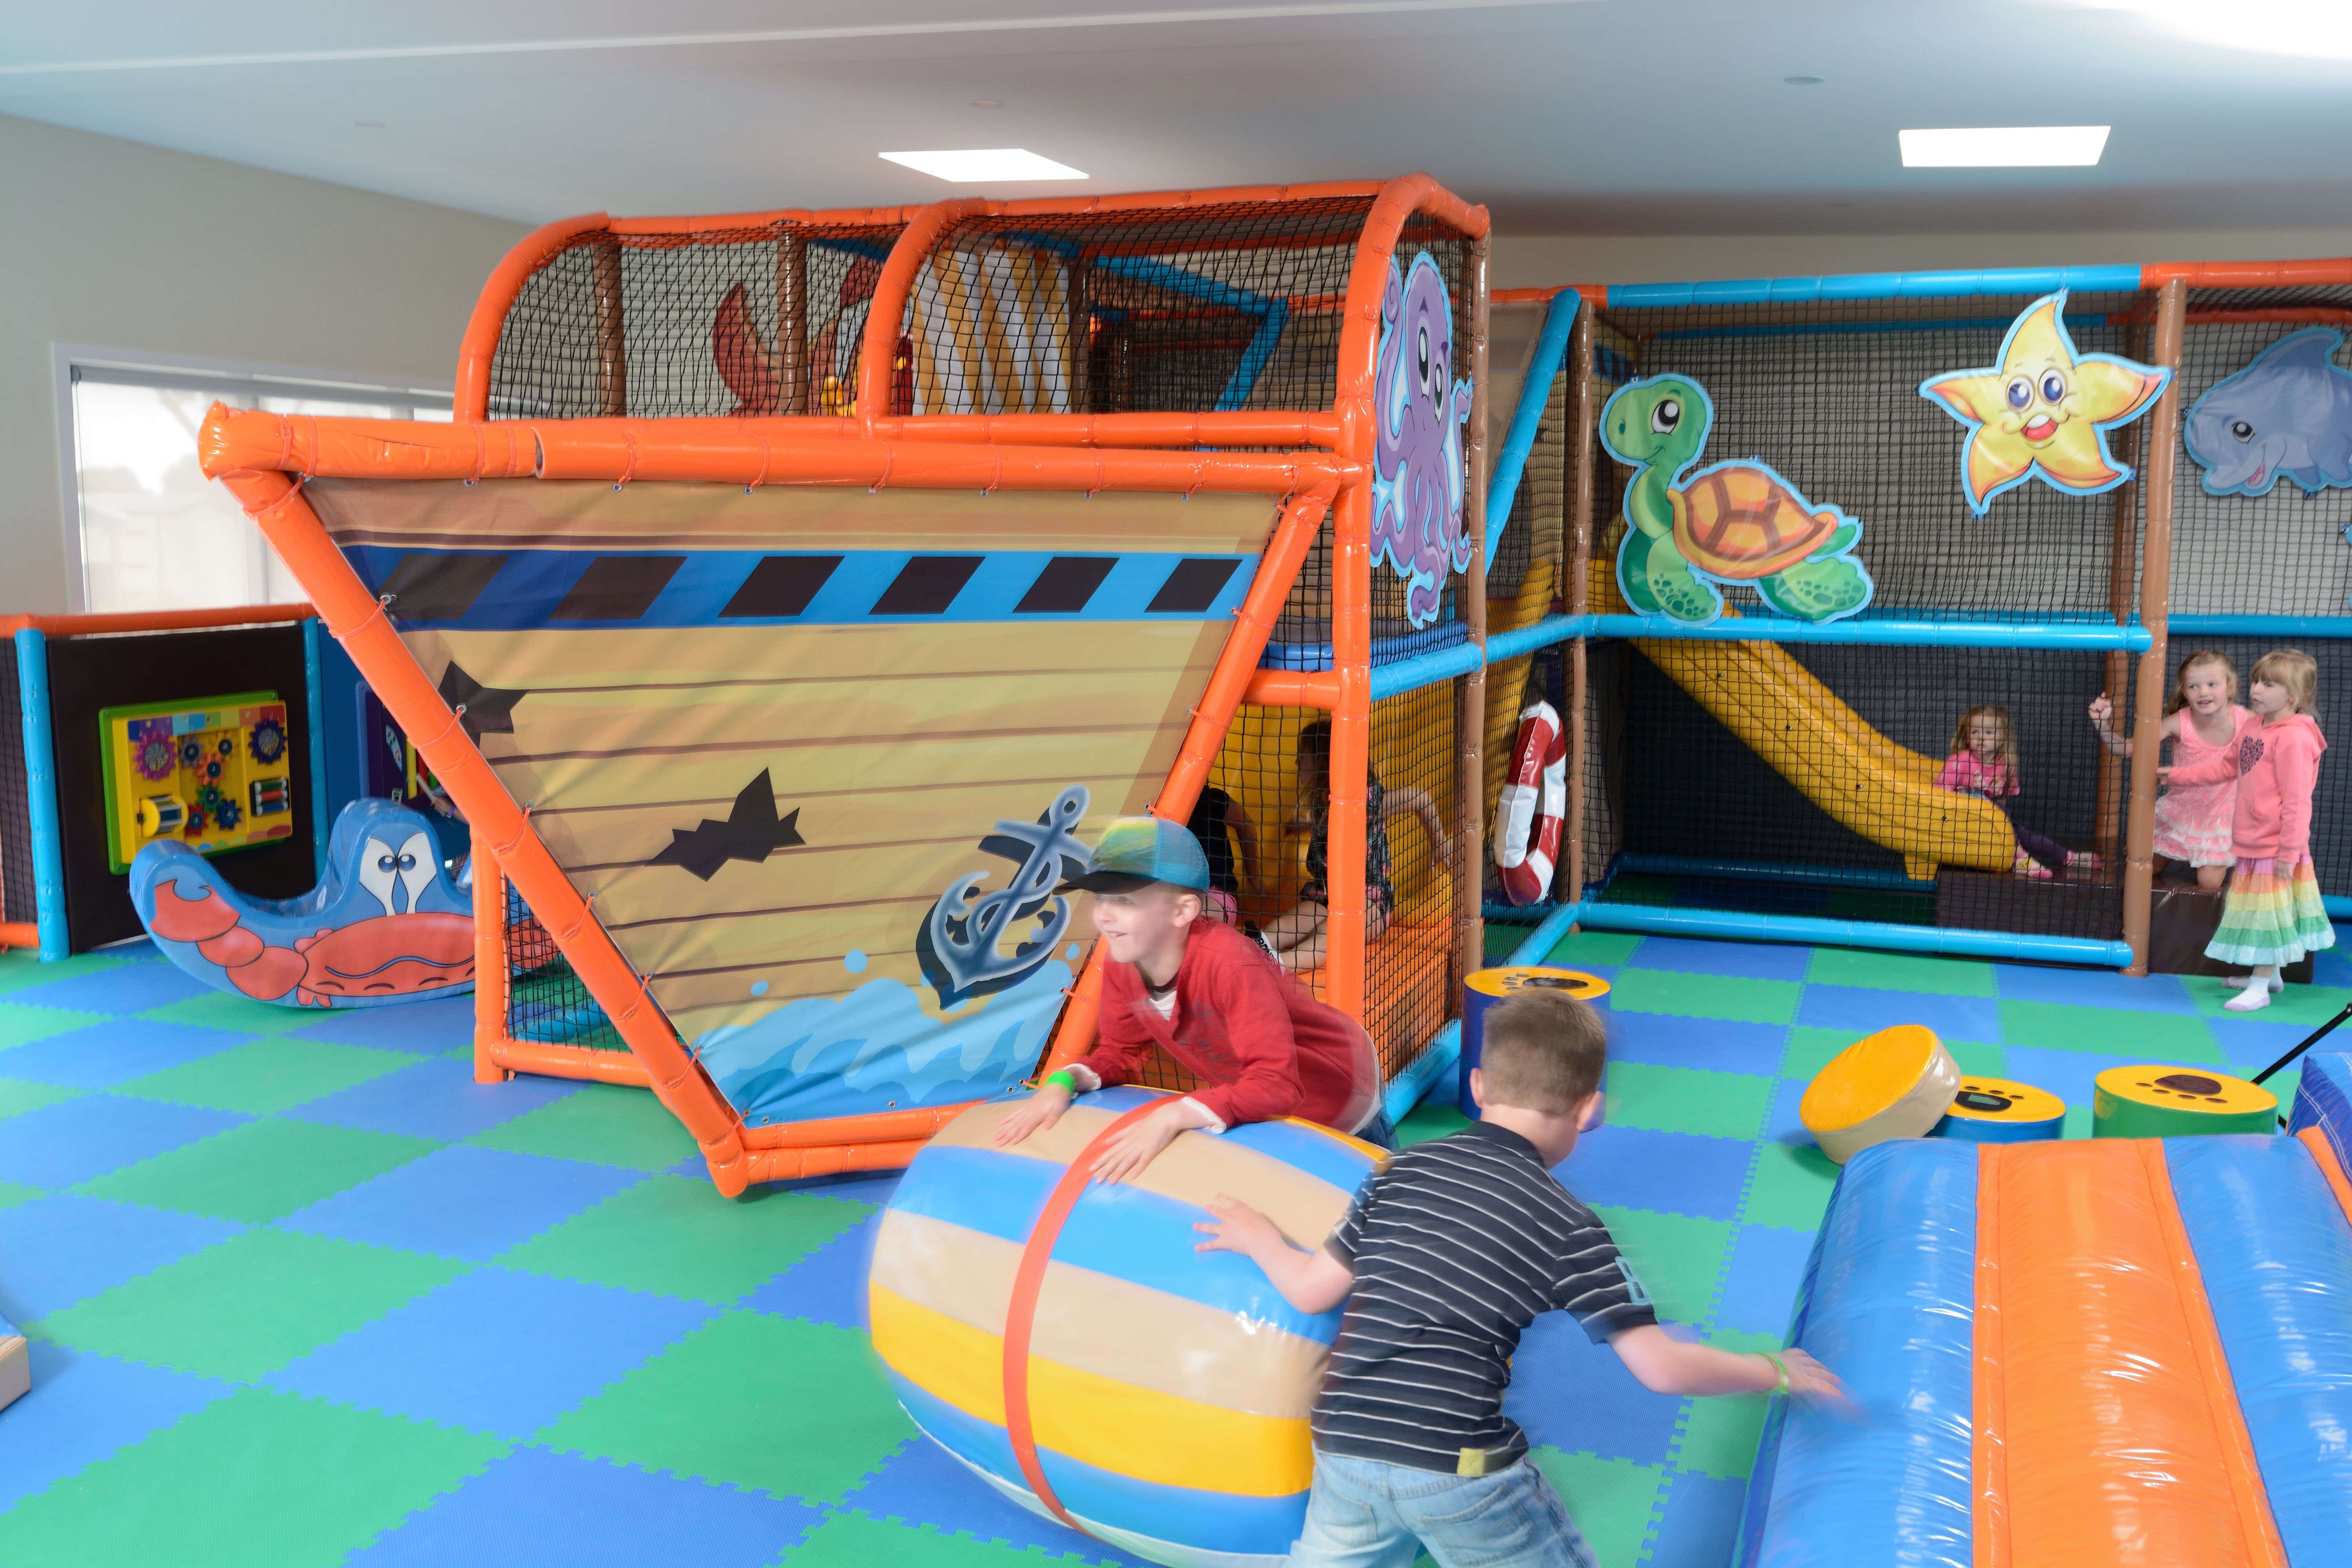 BIG4 Port Fairy Holiday Park Monkeys and Mermaids Indoor Play Centre - Nambucca Heads Accommodation